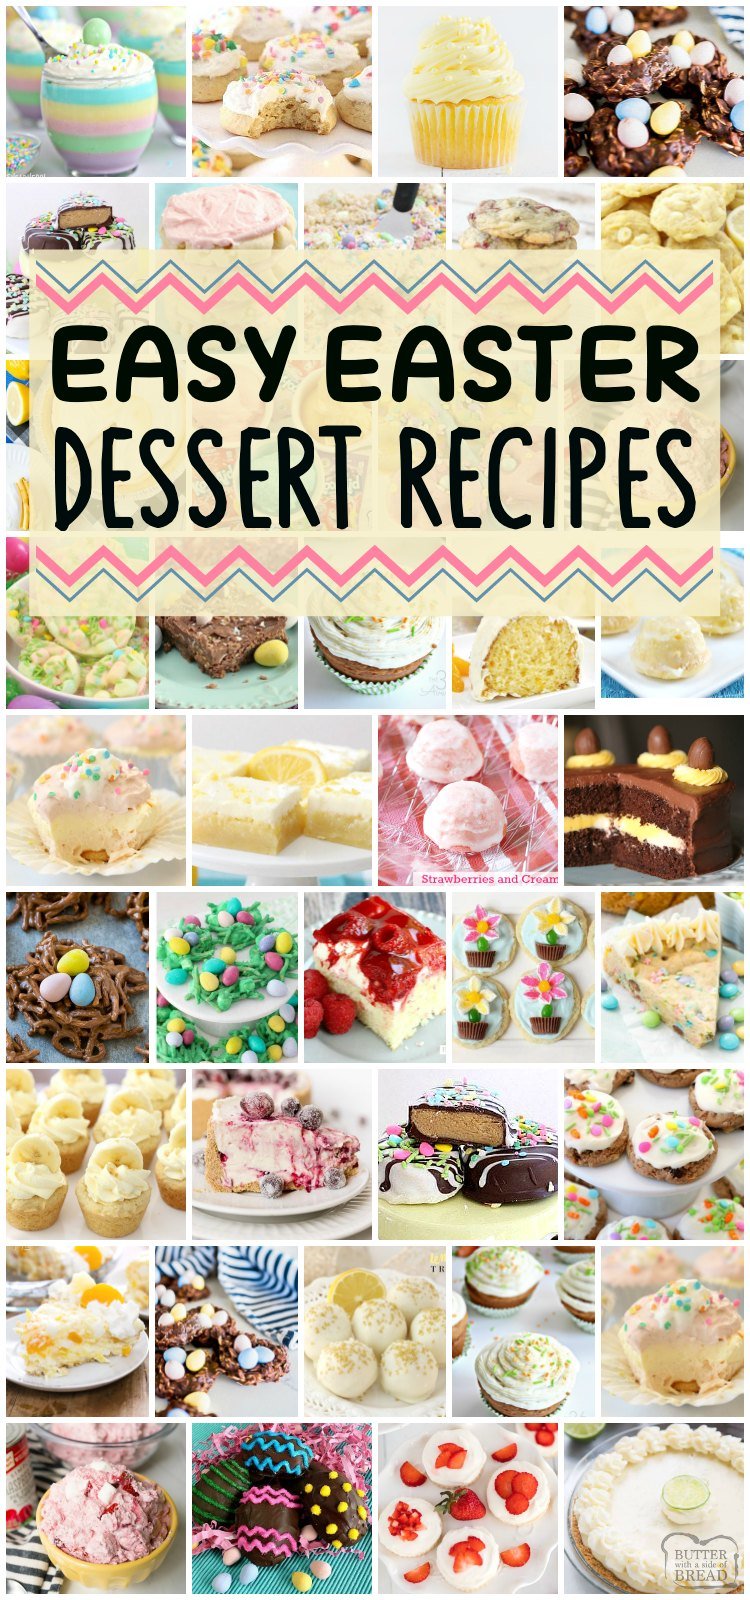 Easy Easter Desserts that everyone will enjoy! All these favorite Easter recipes, from the Peanut Butter Easter Eggs to the Little Lemon Drops, are some of our favorite treats for this special holiday! #easterrecipe #easterrecipe